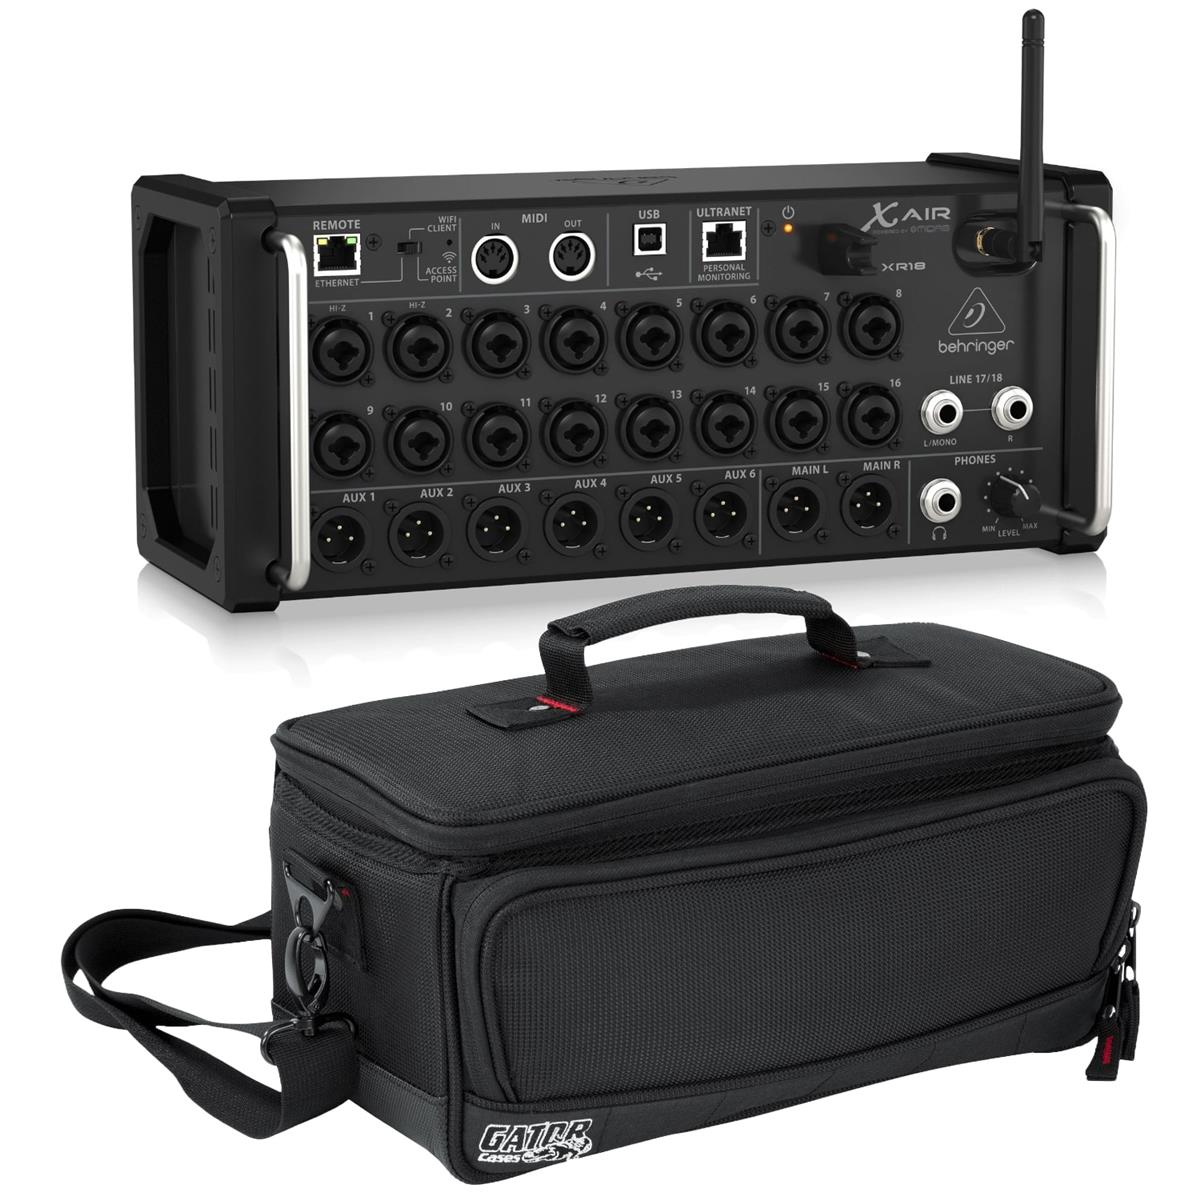 Image of Behringer XAir XR18 18-Channel Mixer f/iPad or Android Tablet W/Gator Nylon Bag